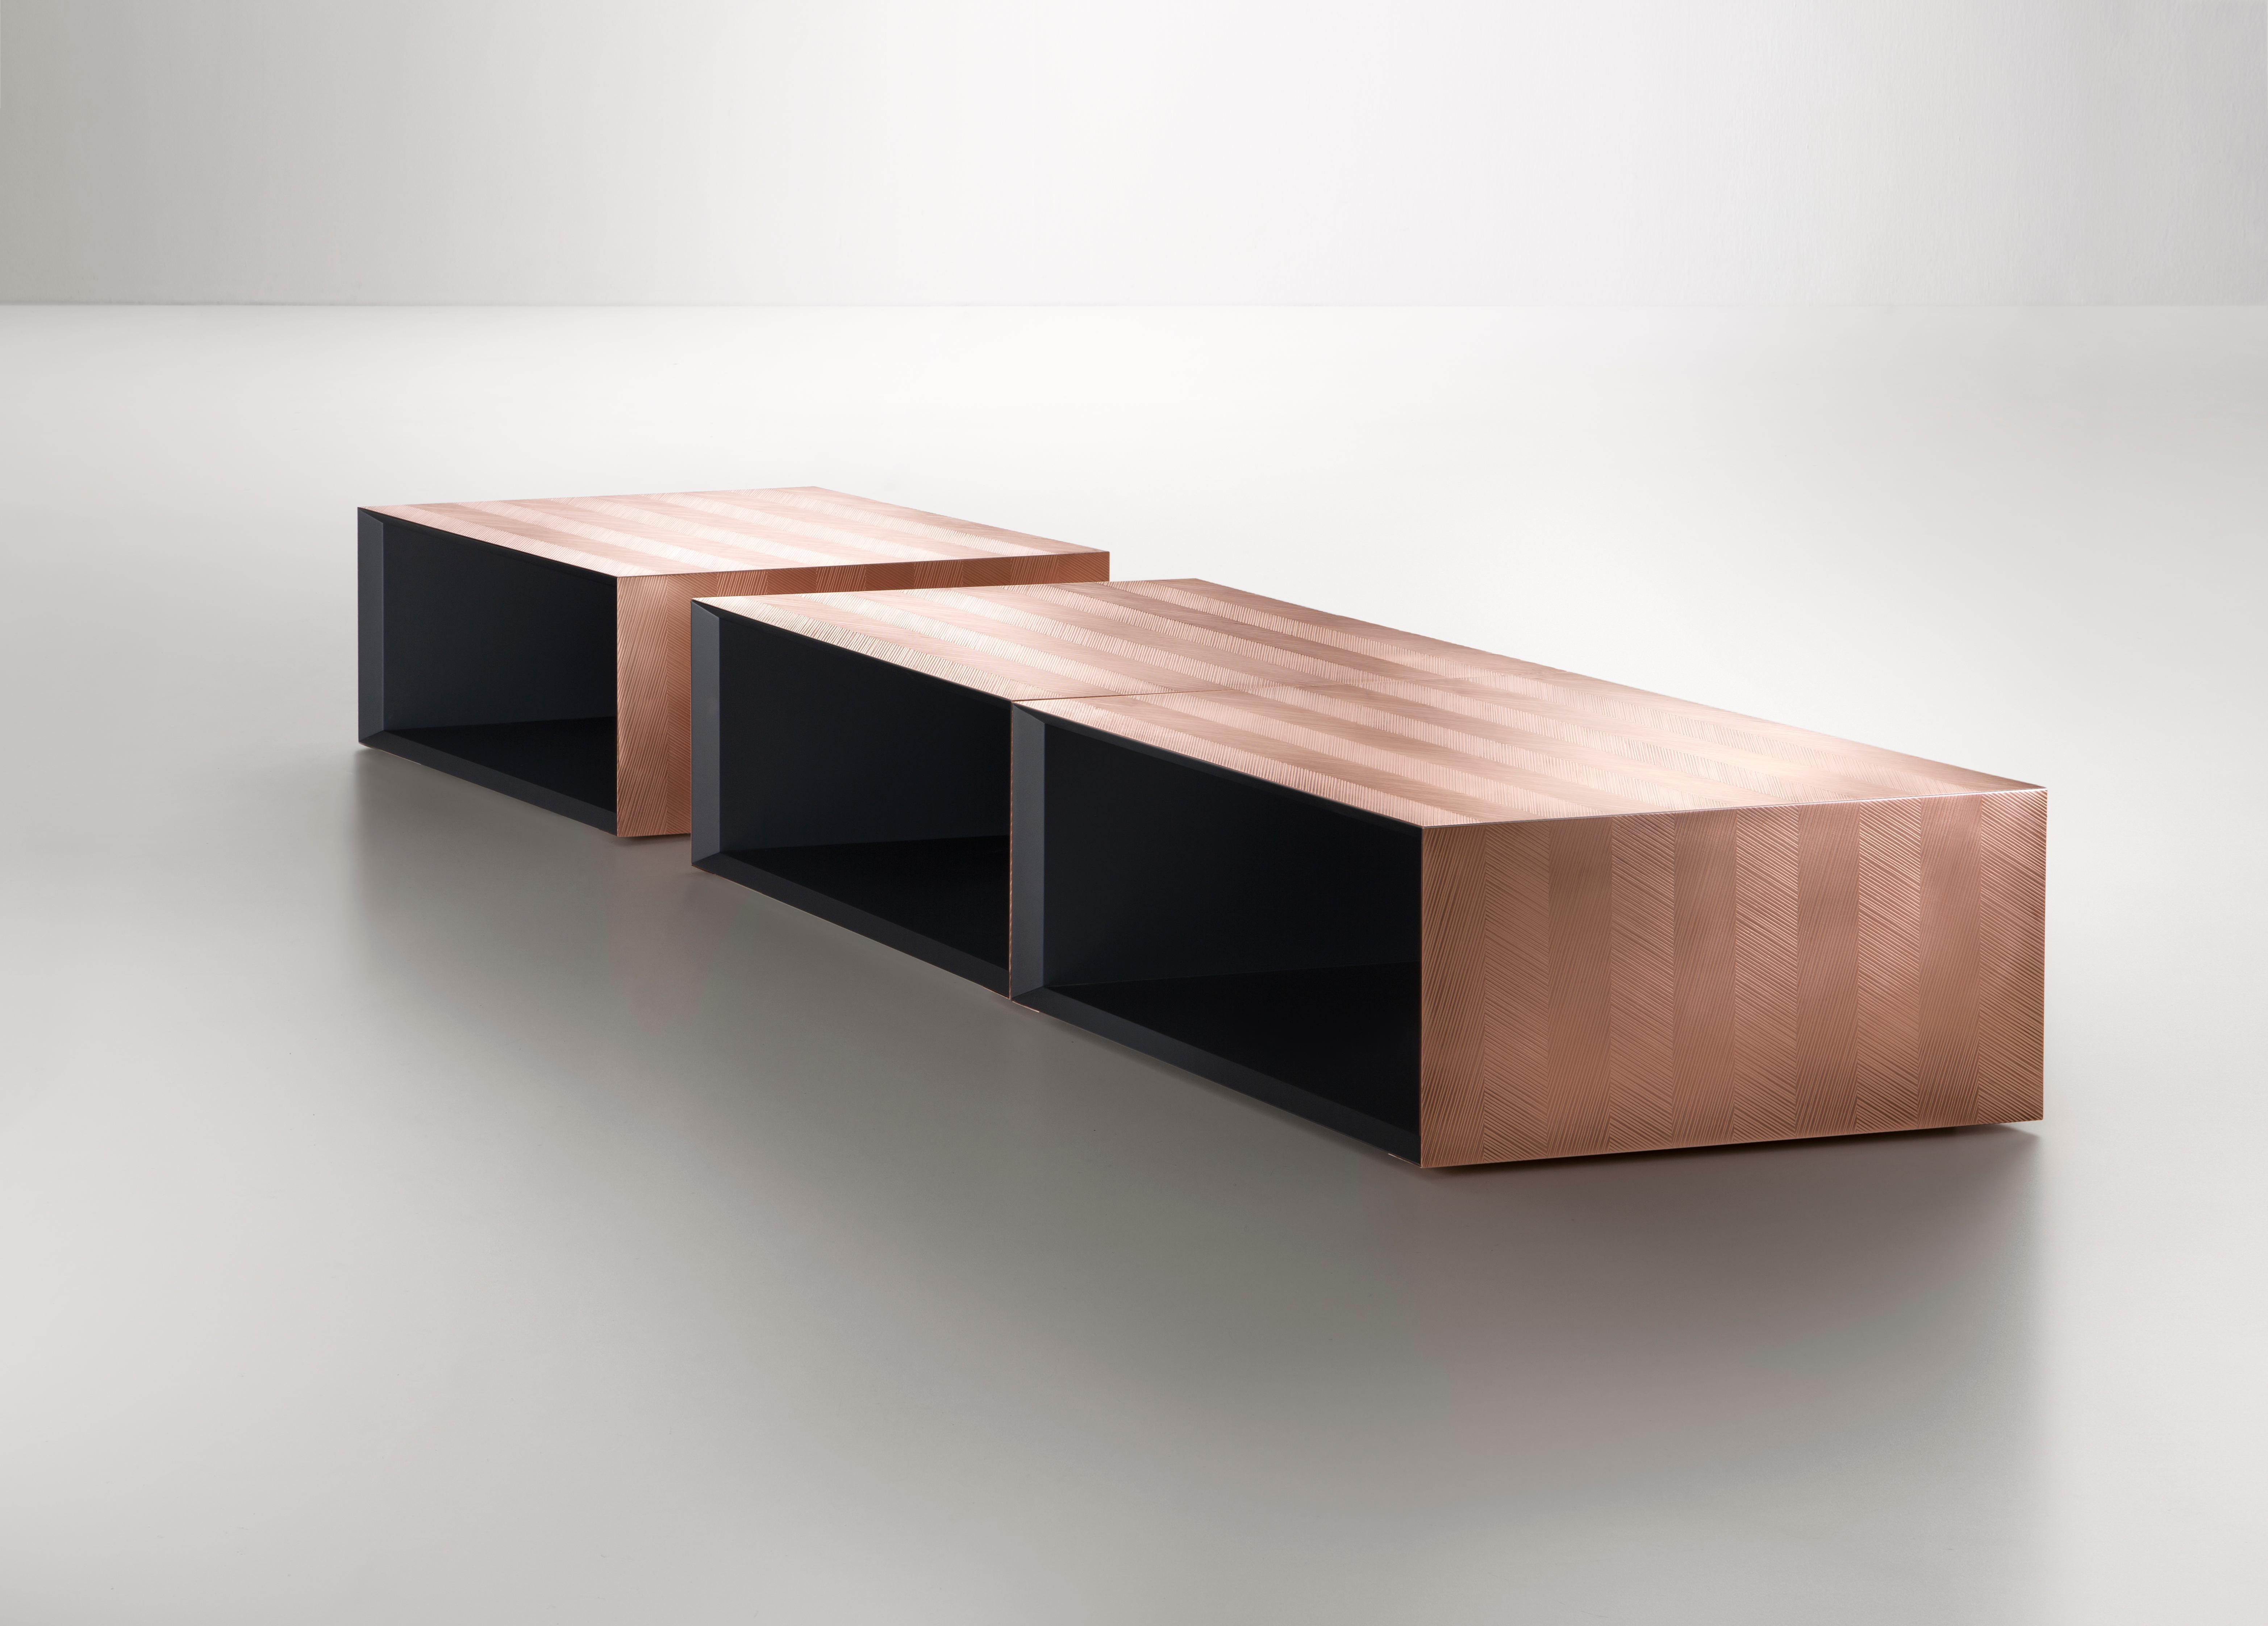 A small rhomboid-shaped table with storage space. Its simple shape renders it modular: by combining it with other identical elements, either moved around or rotated, numerous configurations can be obtained. The natural copper “skin” worked using the